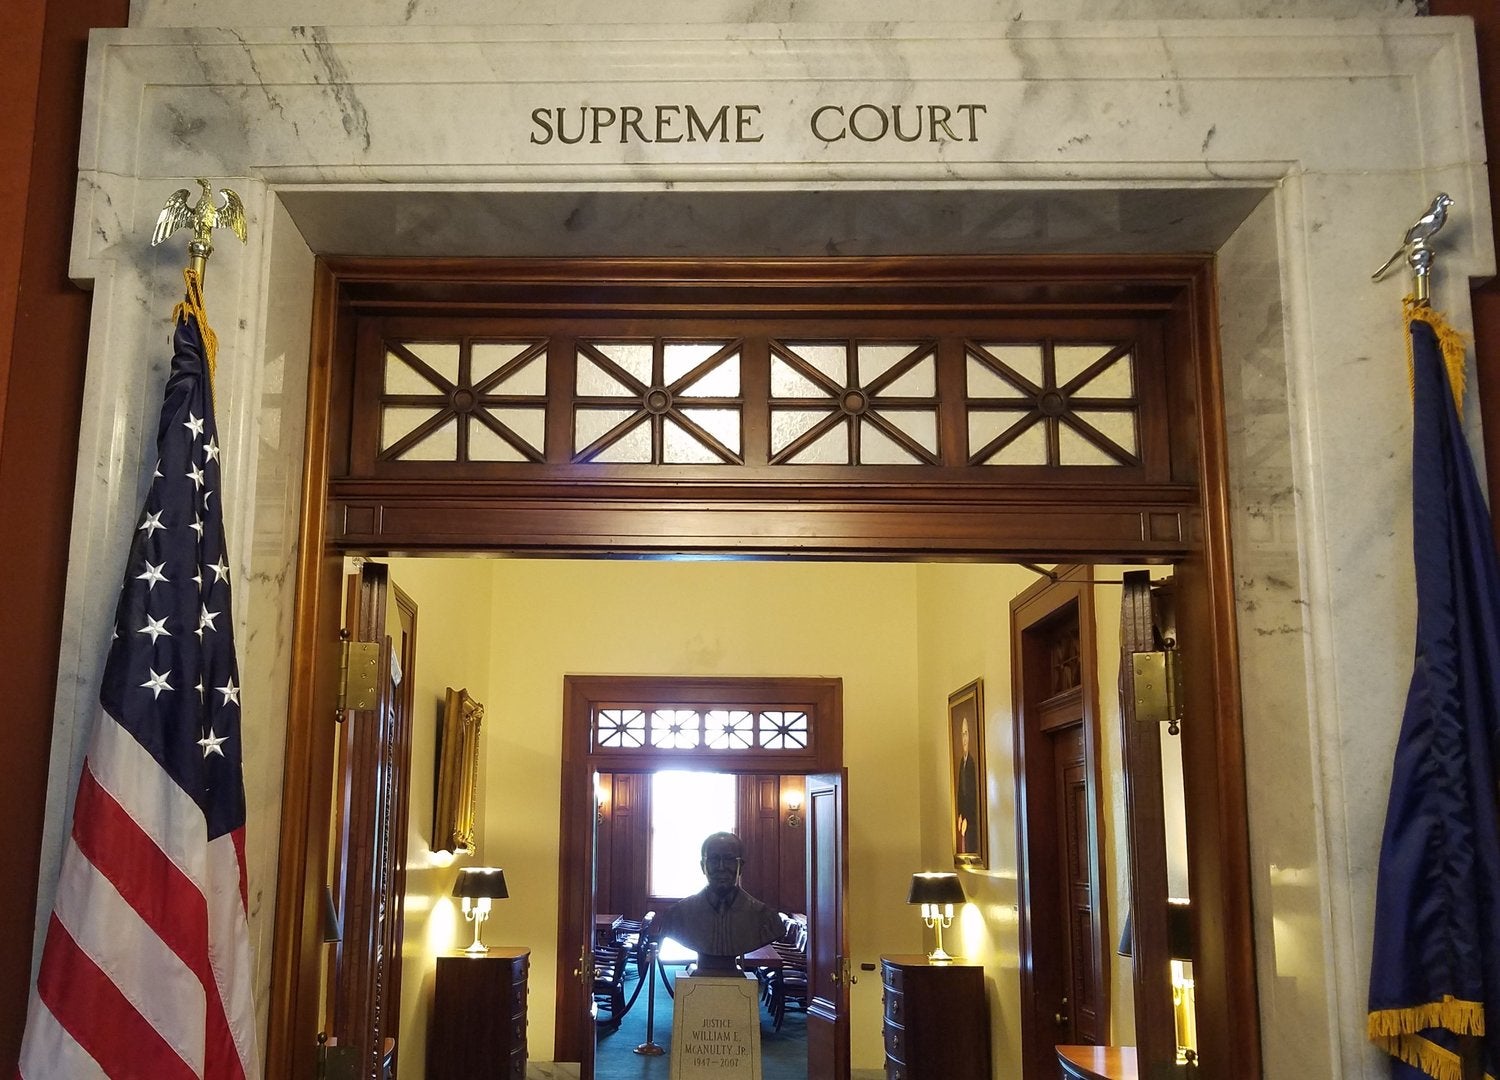 Cases dealing with executive order powers on docket of Ky high court